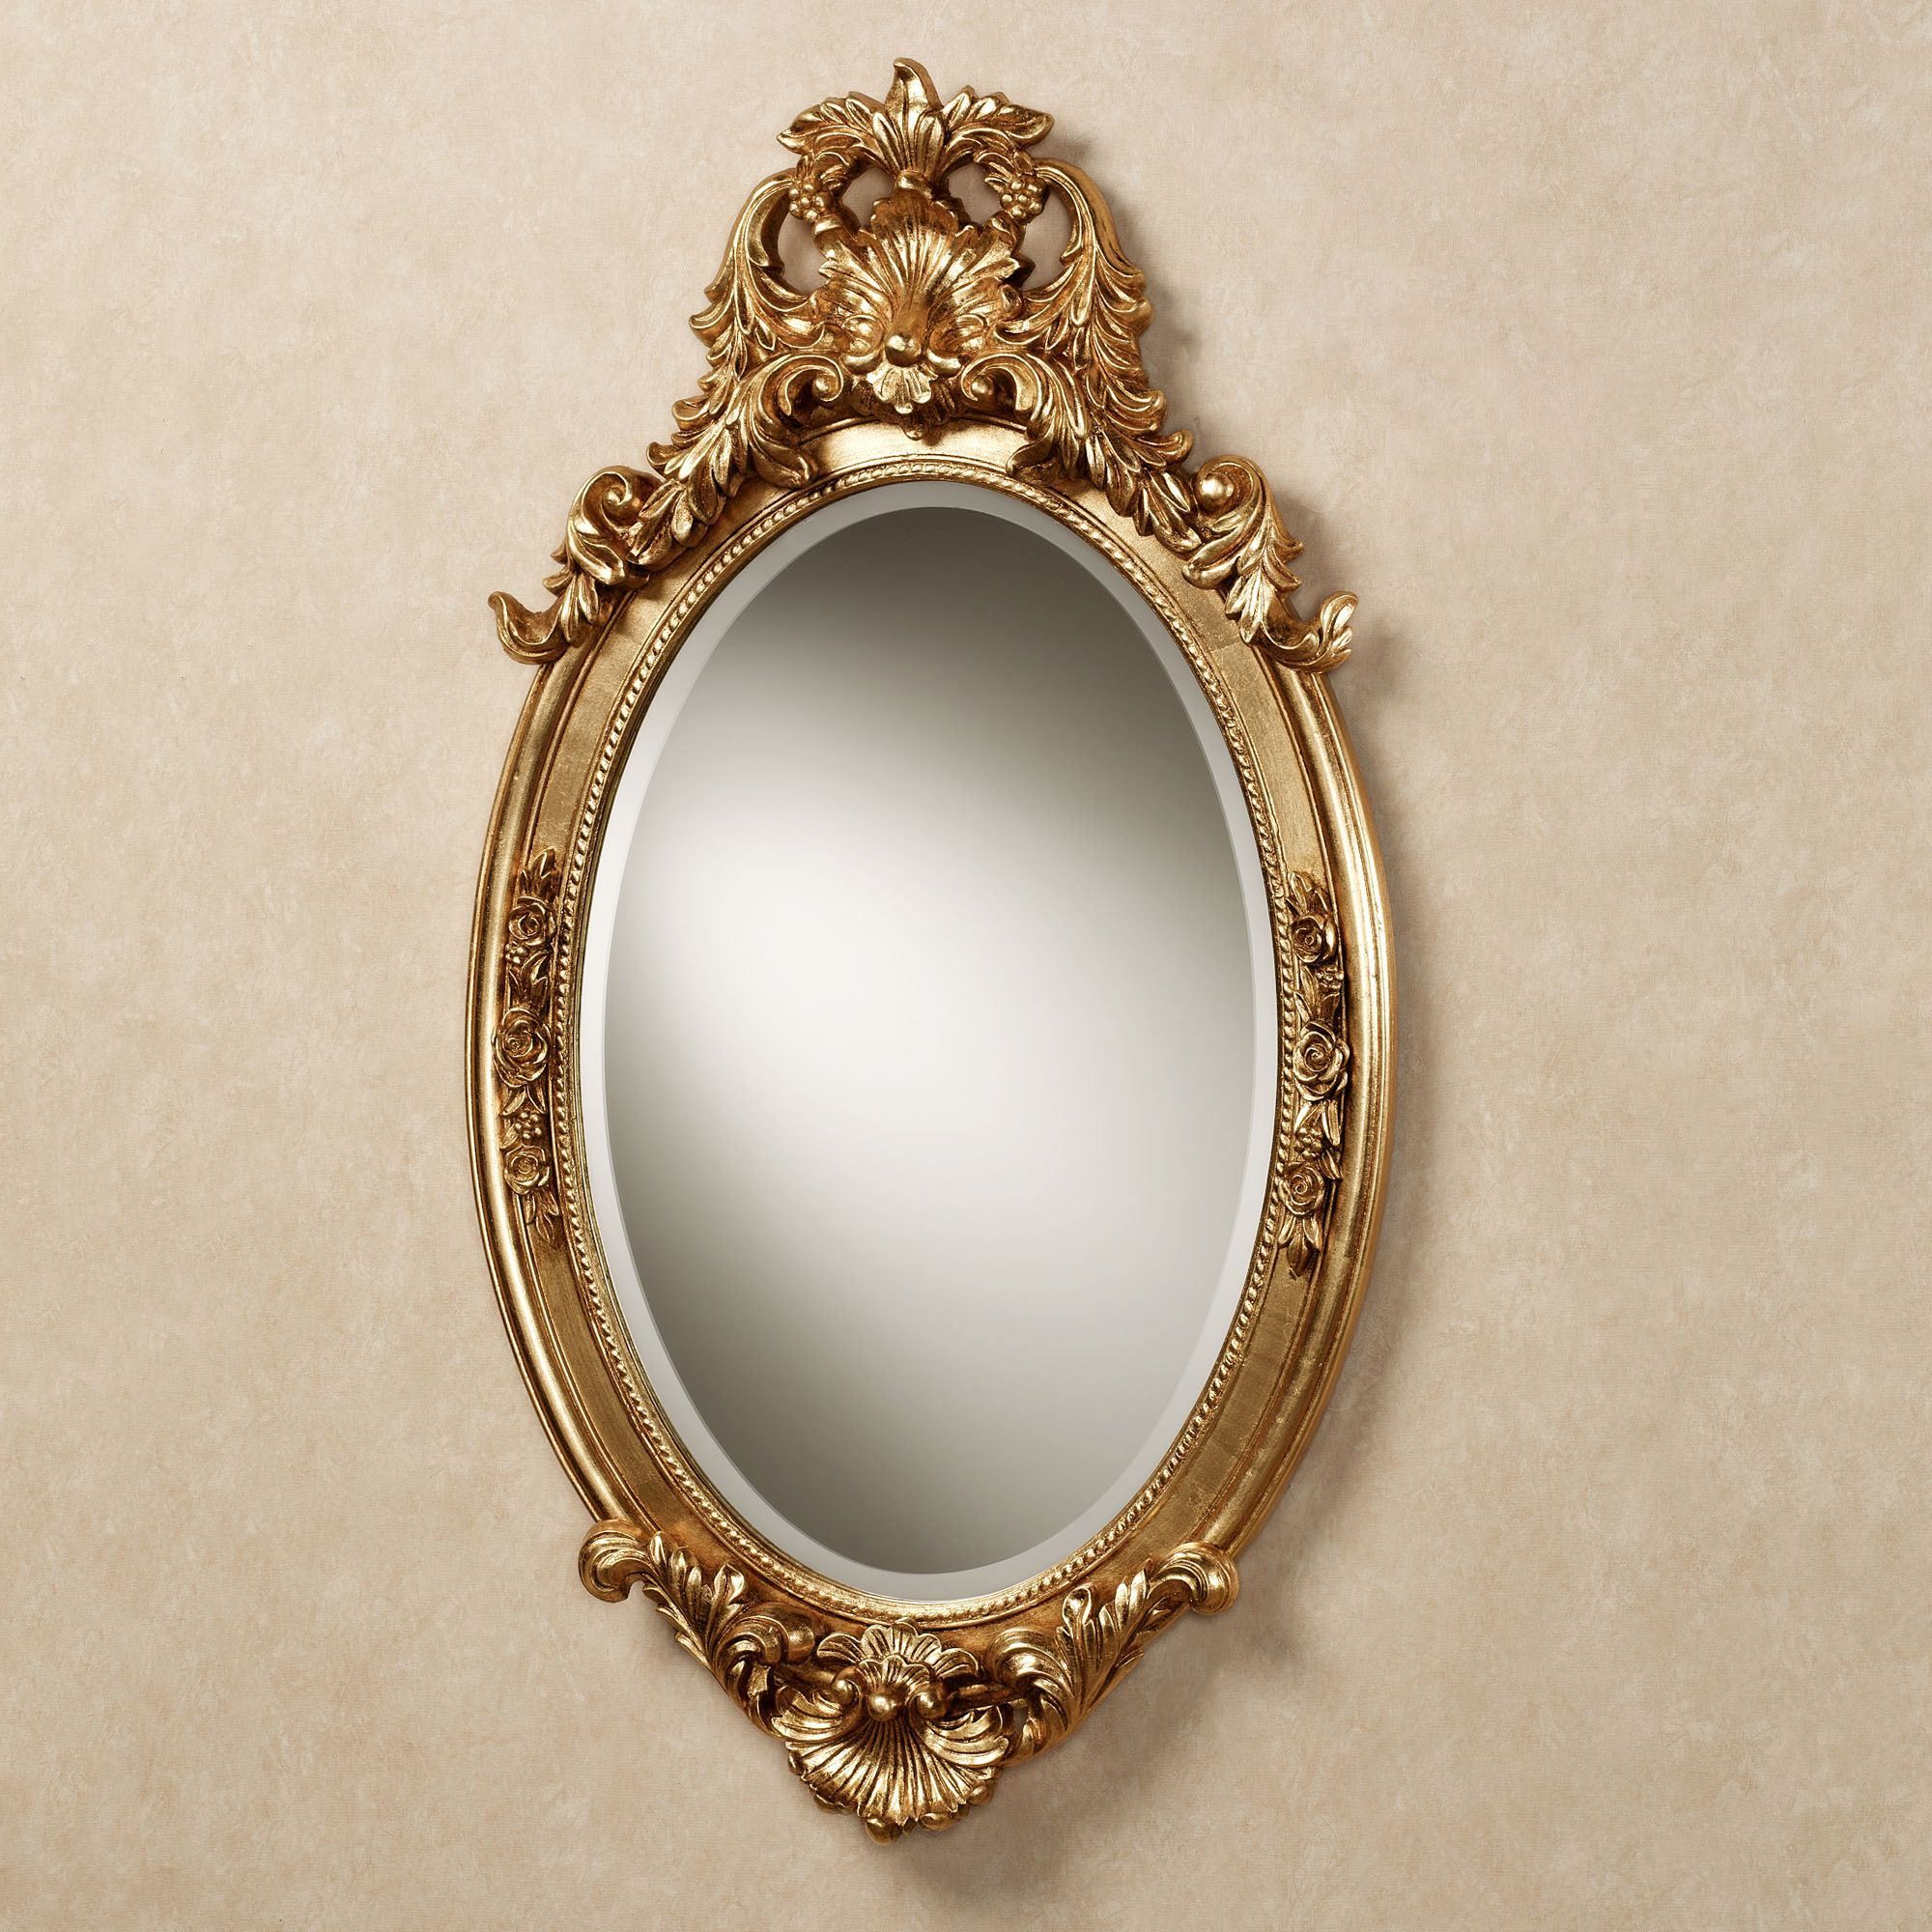 Hallandale Acanthus Leaf Oval Wall Mirror Intended For Oval Metallic Accent Mirrors (View 2 of 15)